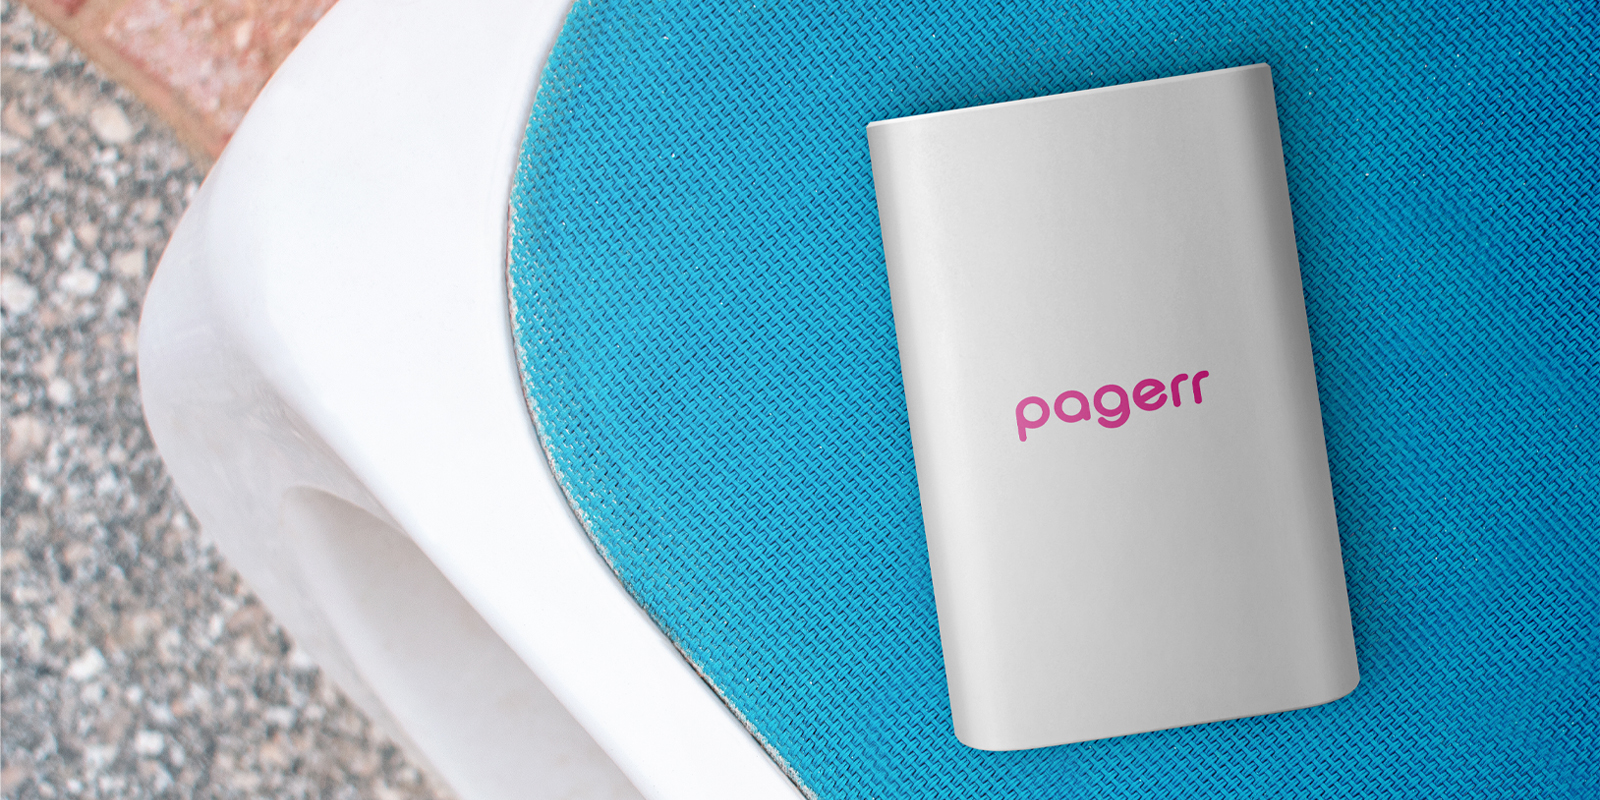 Chargers & power banks in Hobart - Print with Pagerr